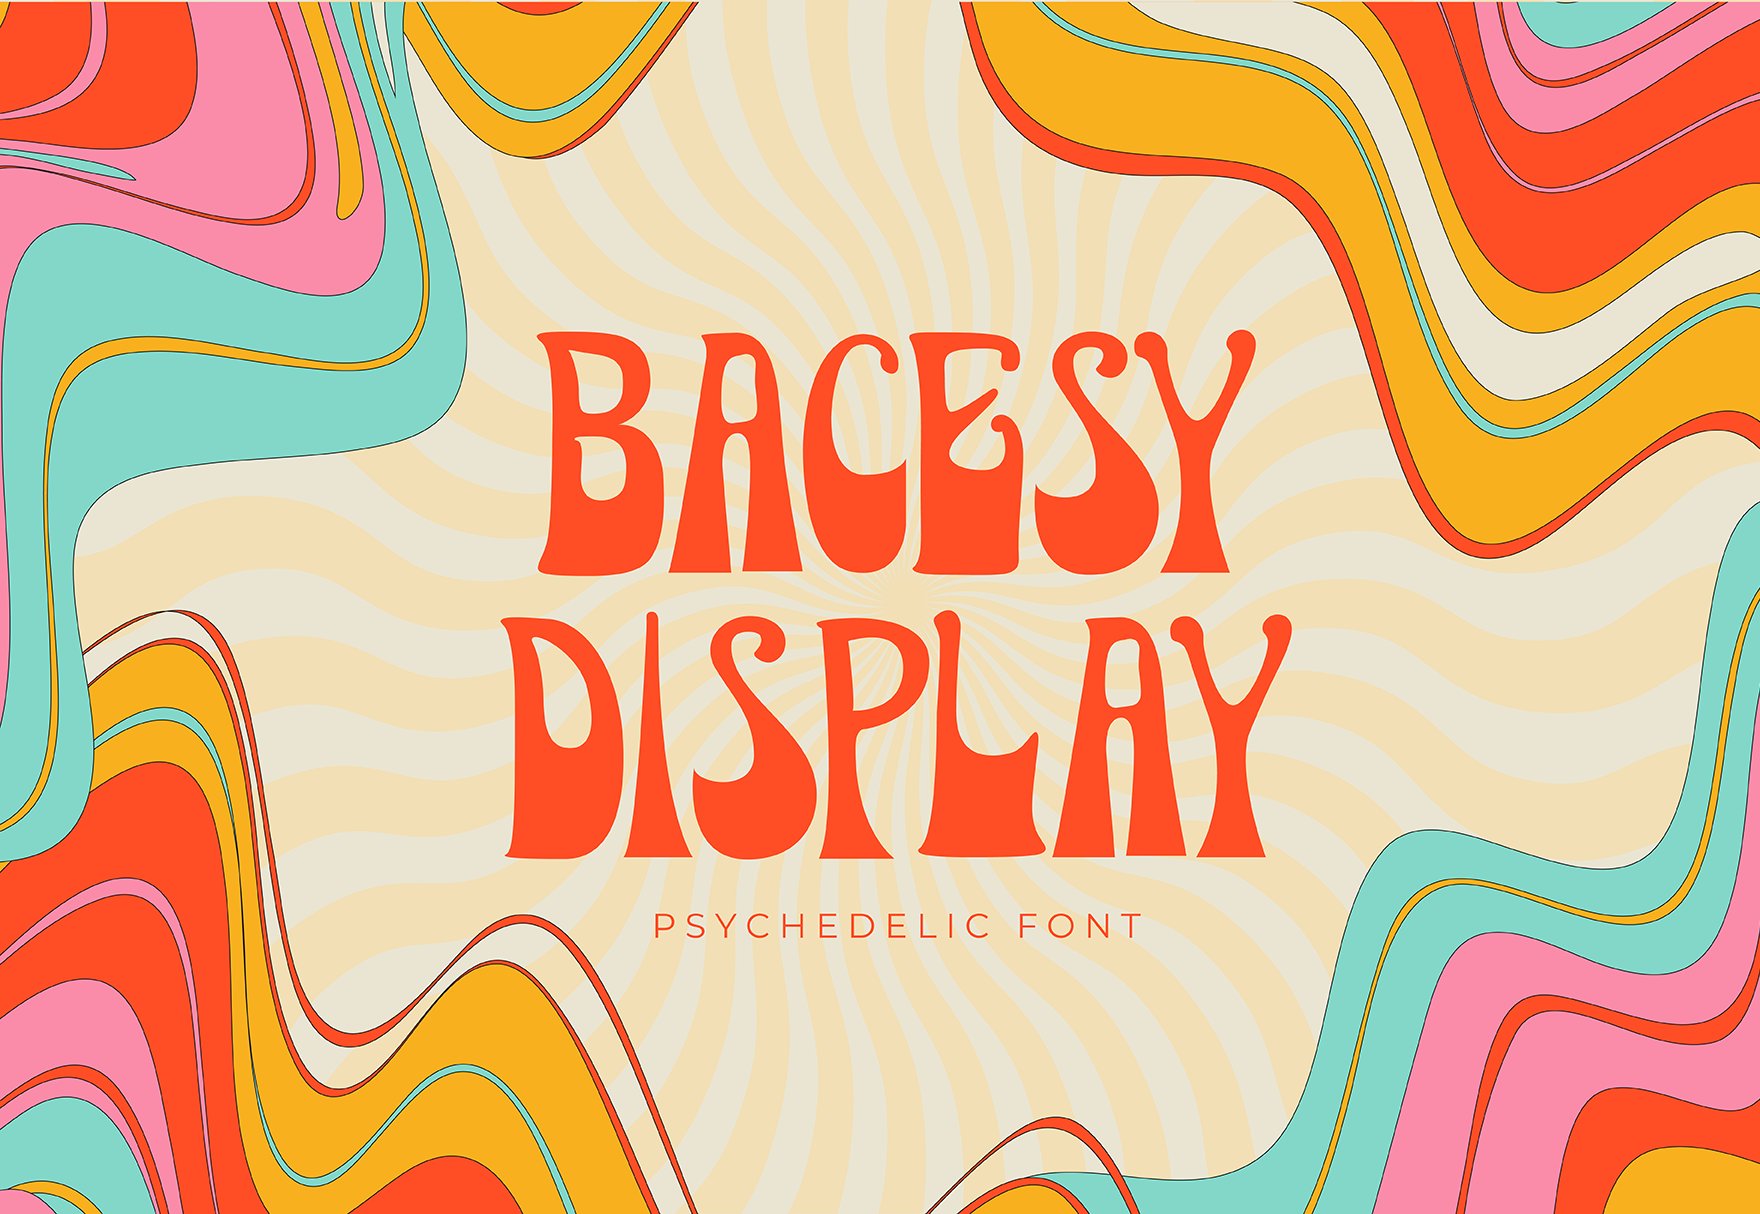 Bacesy Psychedelic Font cover image.